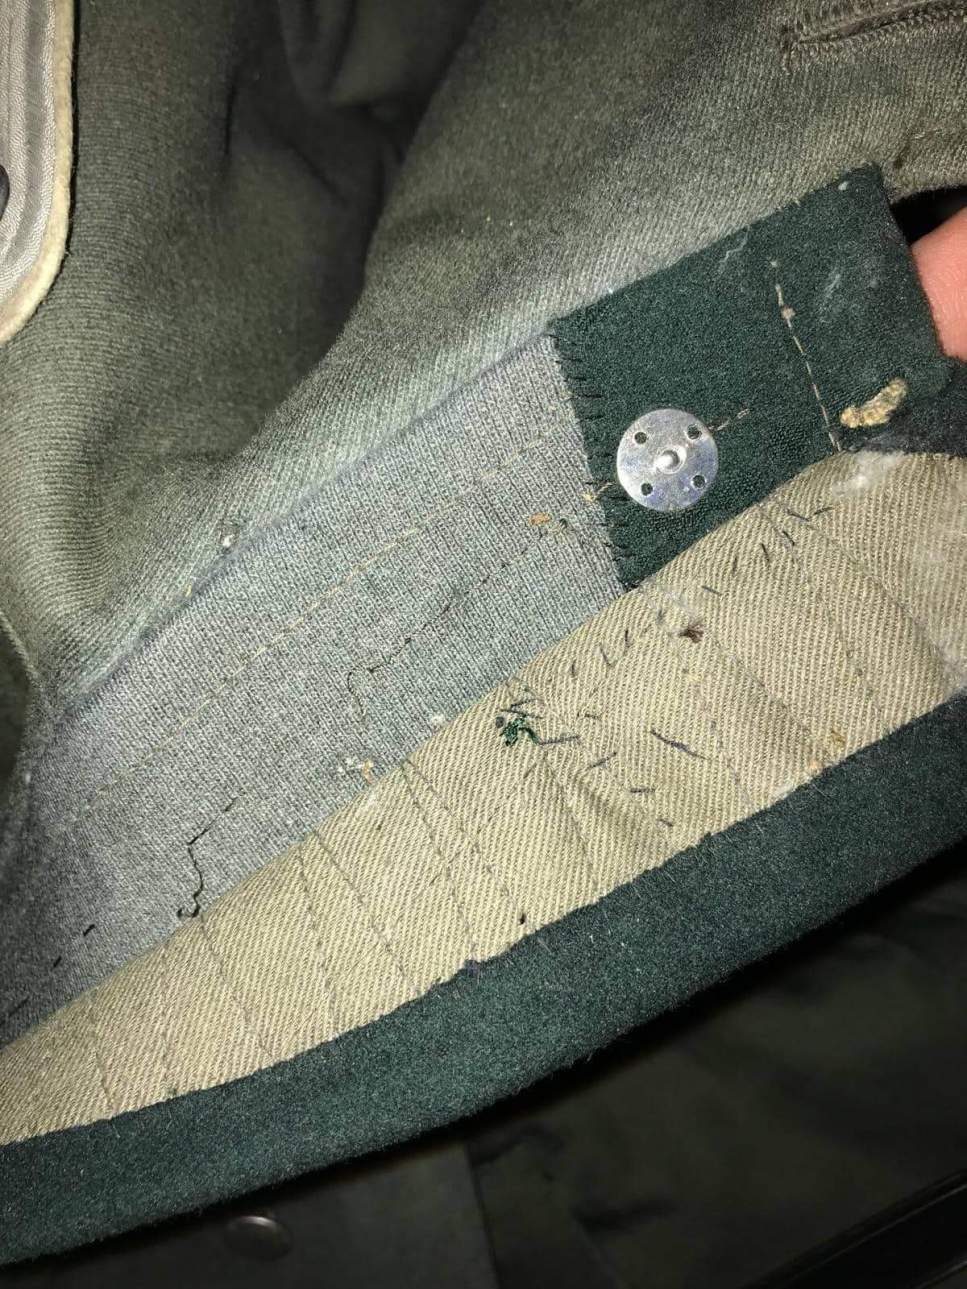 Need help! My wh infantry officer uniform